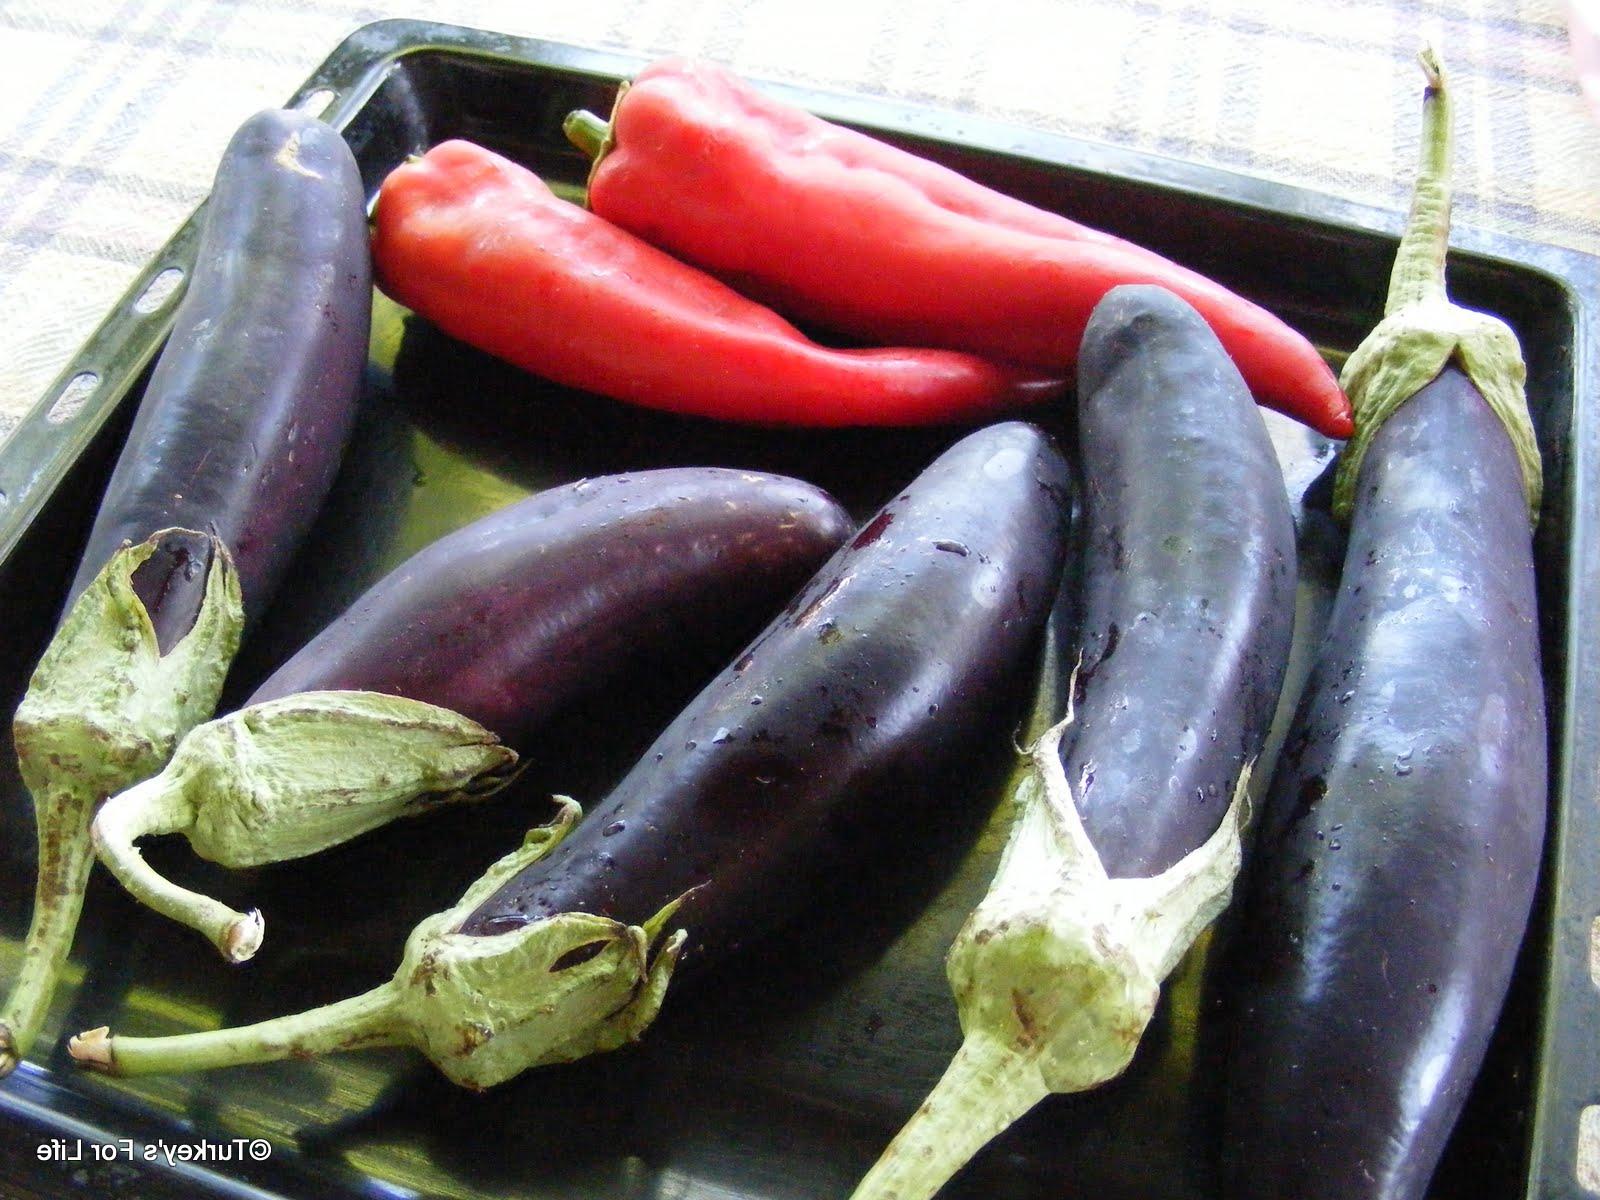 Eggplants and peppers